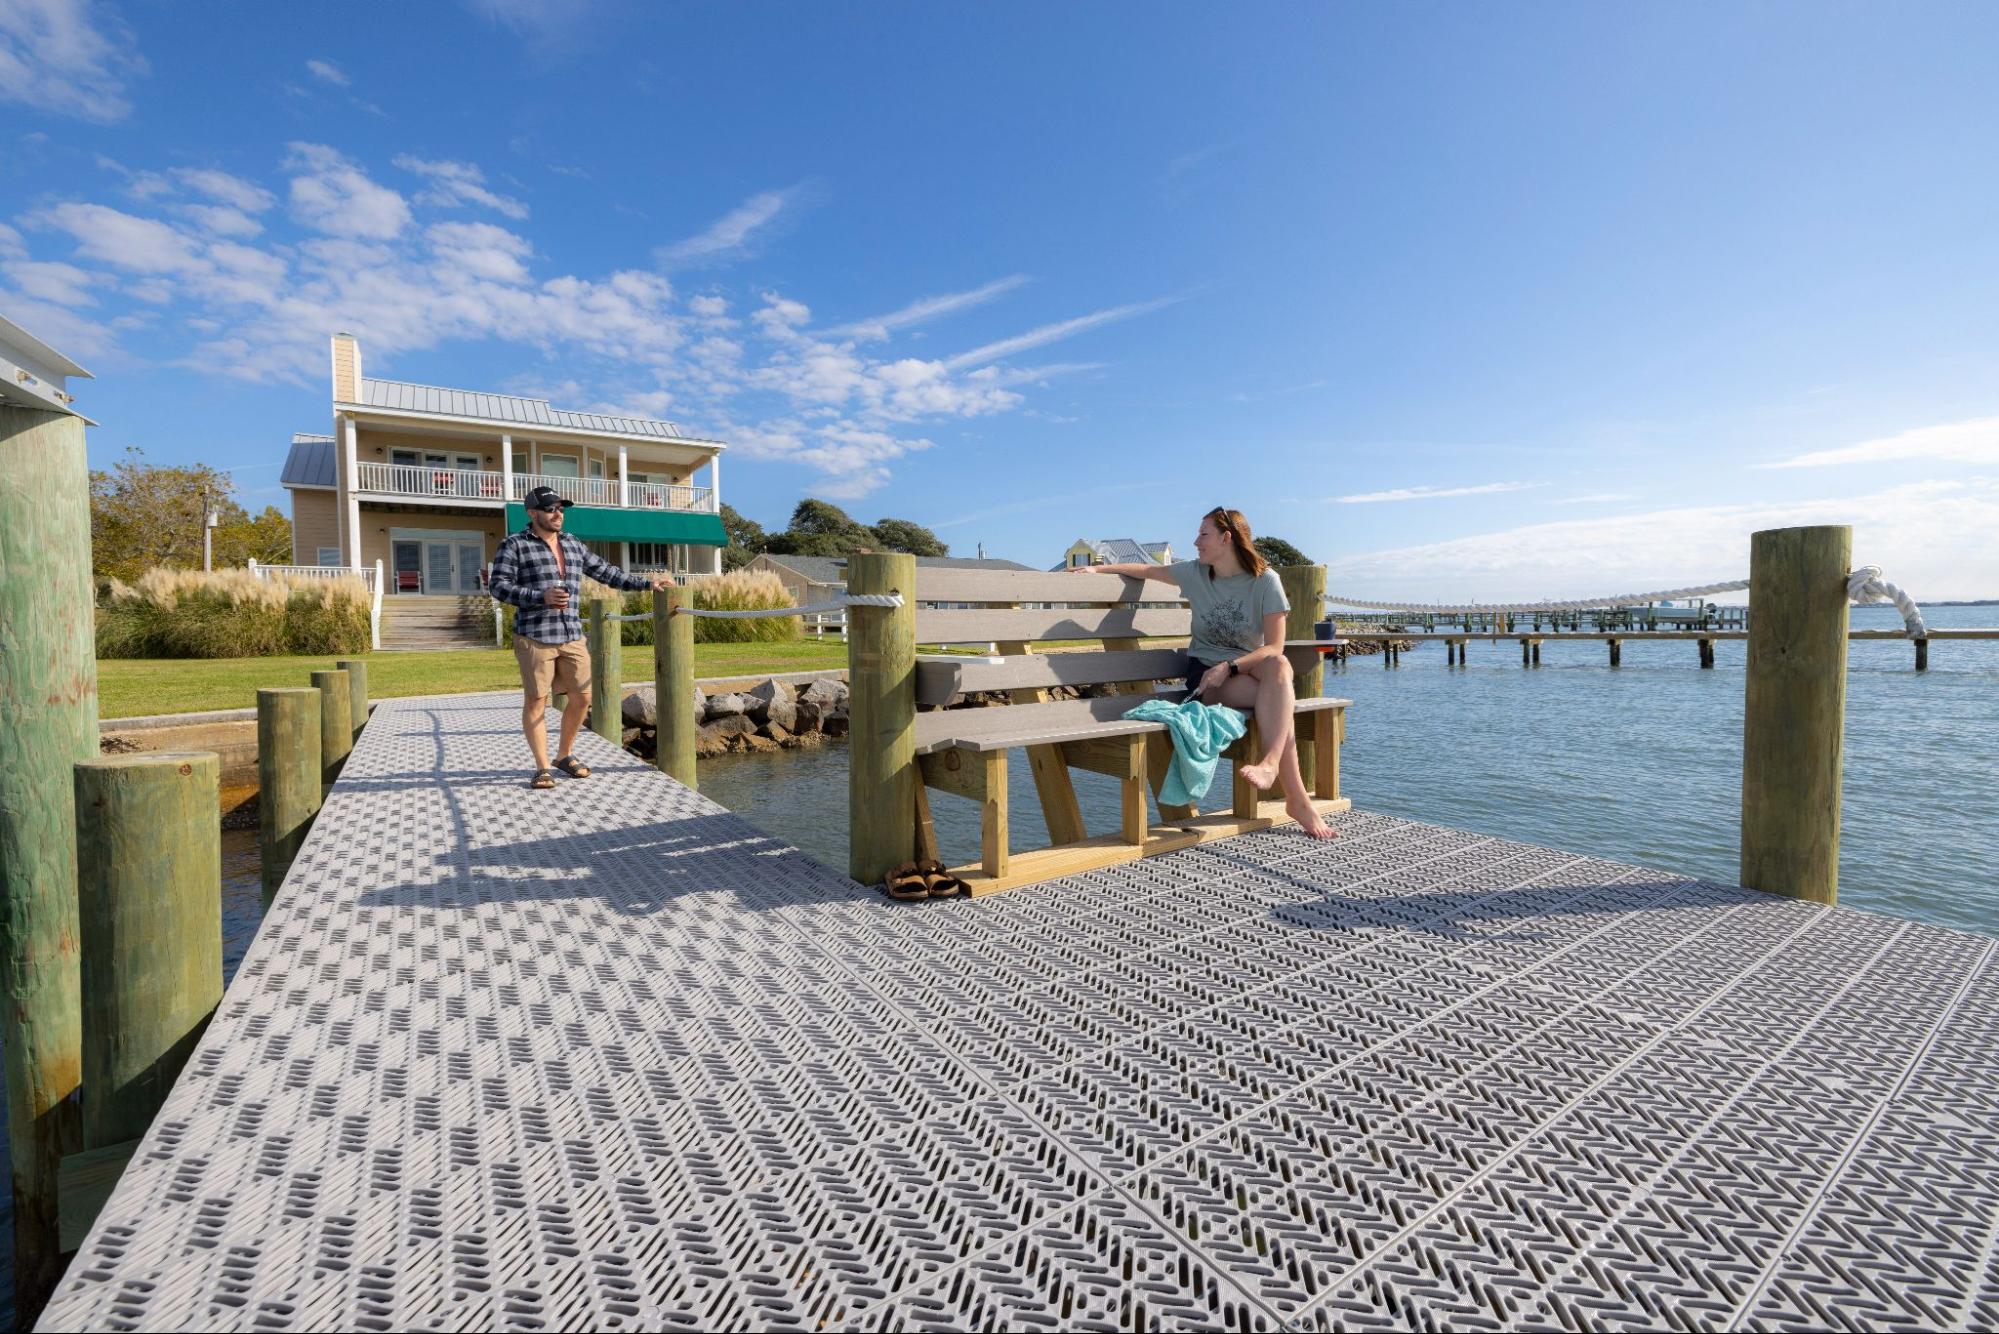 One person is sitting on a bench at a dock made out of polypropylene while another person is standing on the dock talking to them. There is a two-story dock in the background.